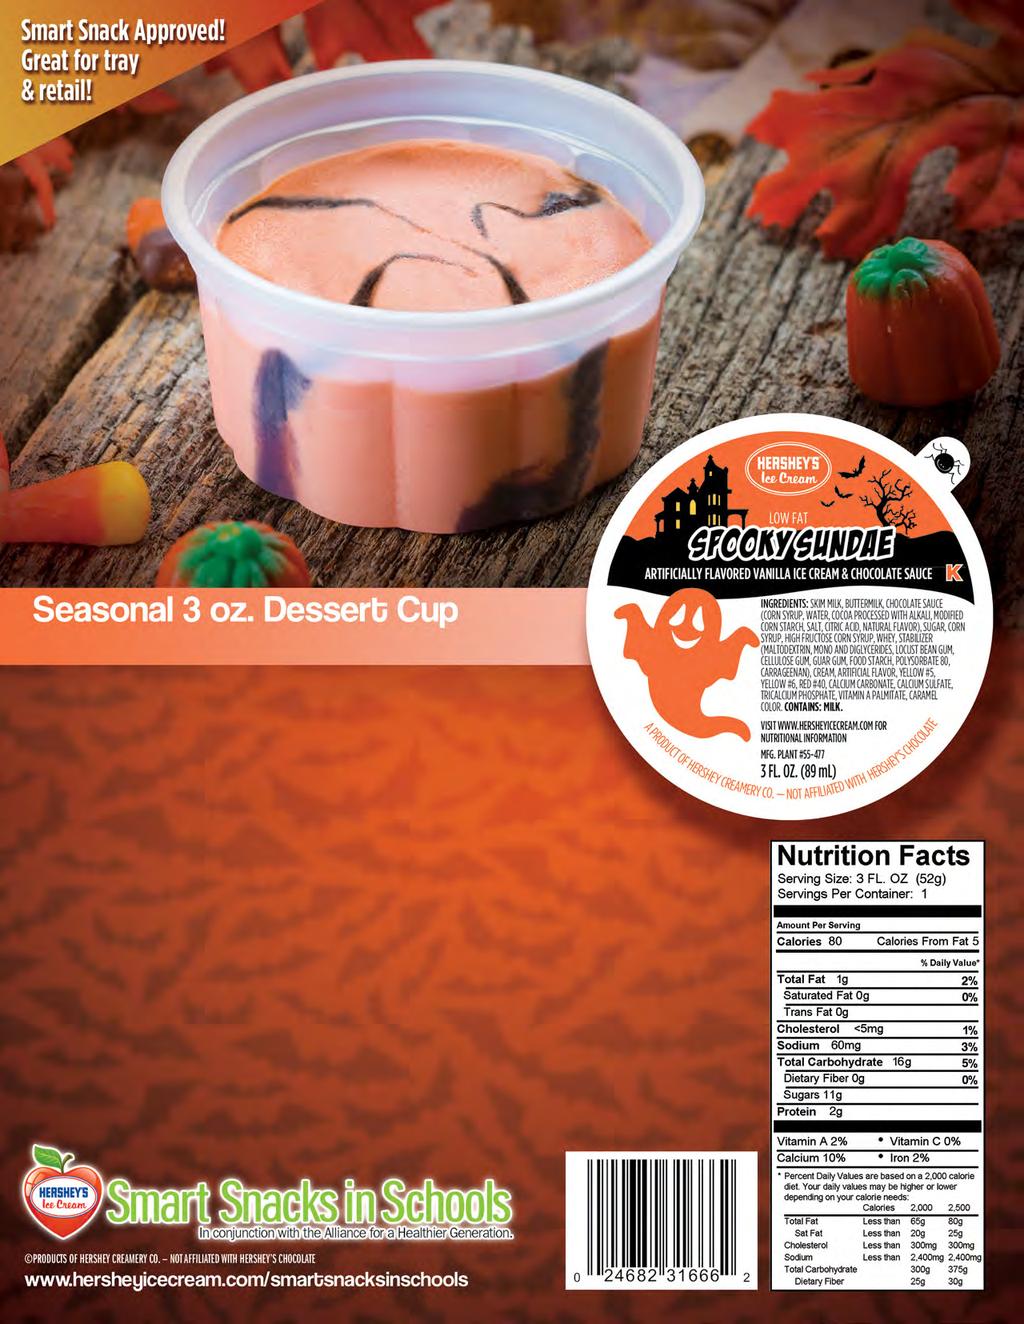 PRE-ORDER TODAY! Available Oct. 1- Oct. 31. Limited Time Only! Hershey s Seasonal 3 oz. Spooky Sundae dessert cups will have you howling with joy at the kids satisfaction and increased sales.